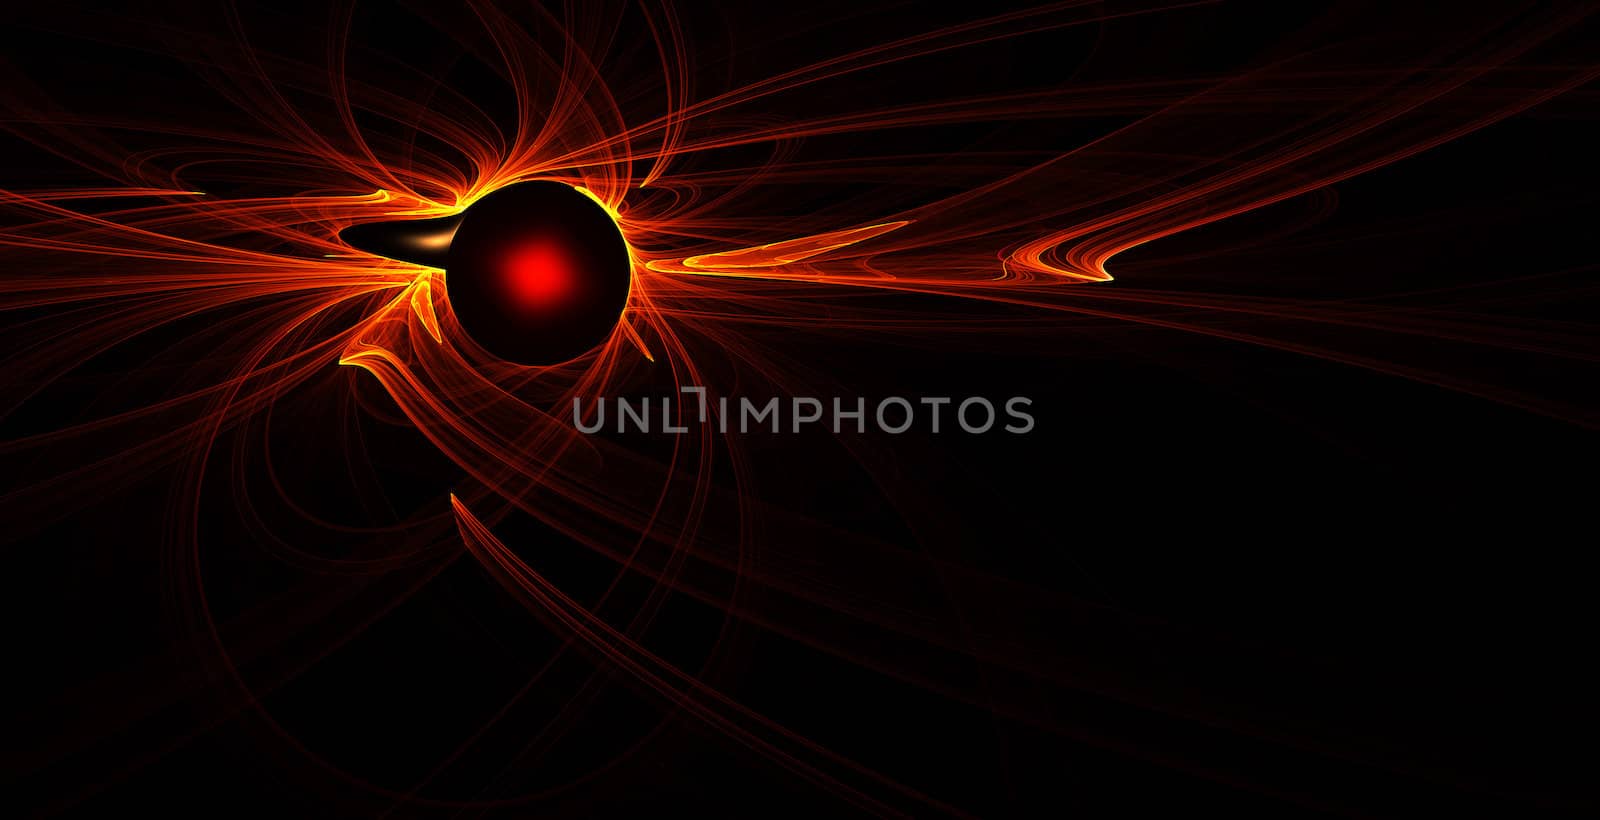 Abstract color image on a black background design illustration.  by mozzyb